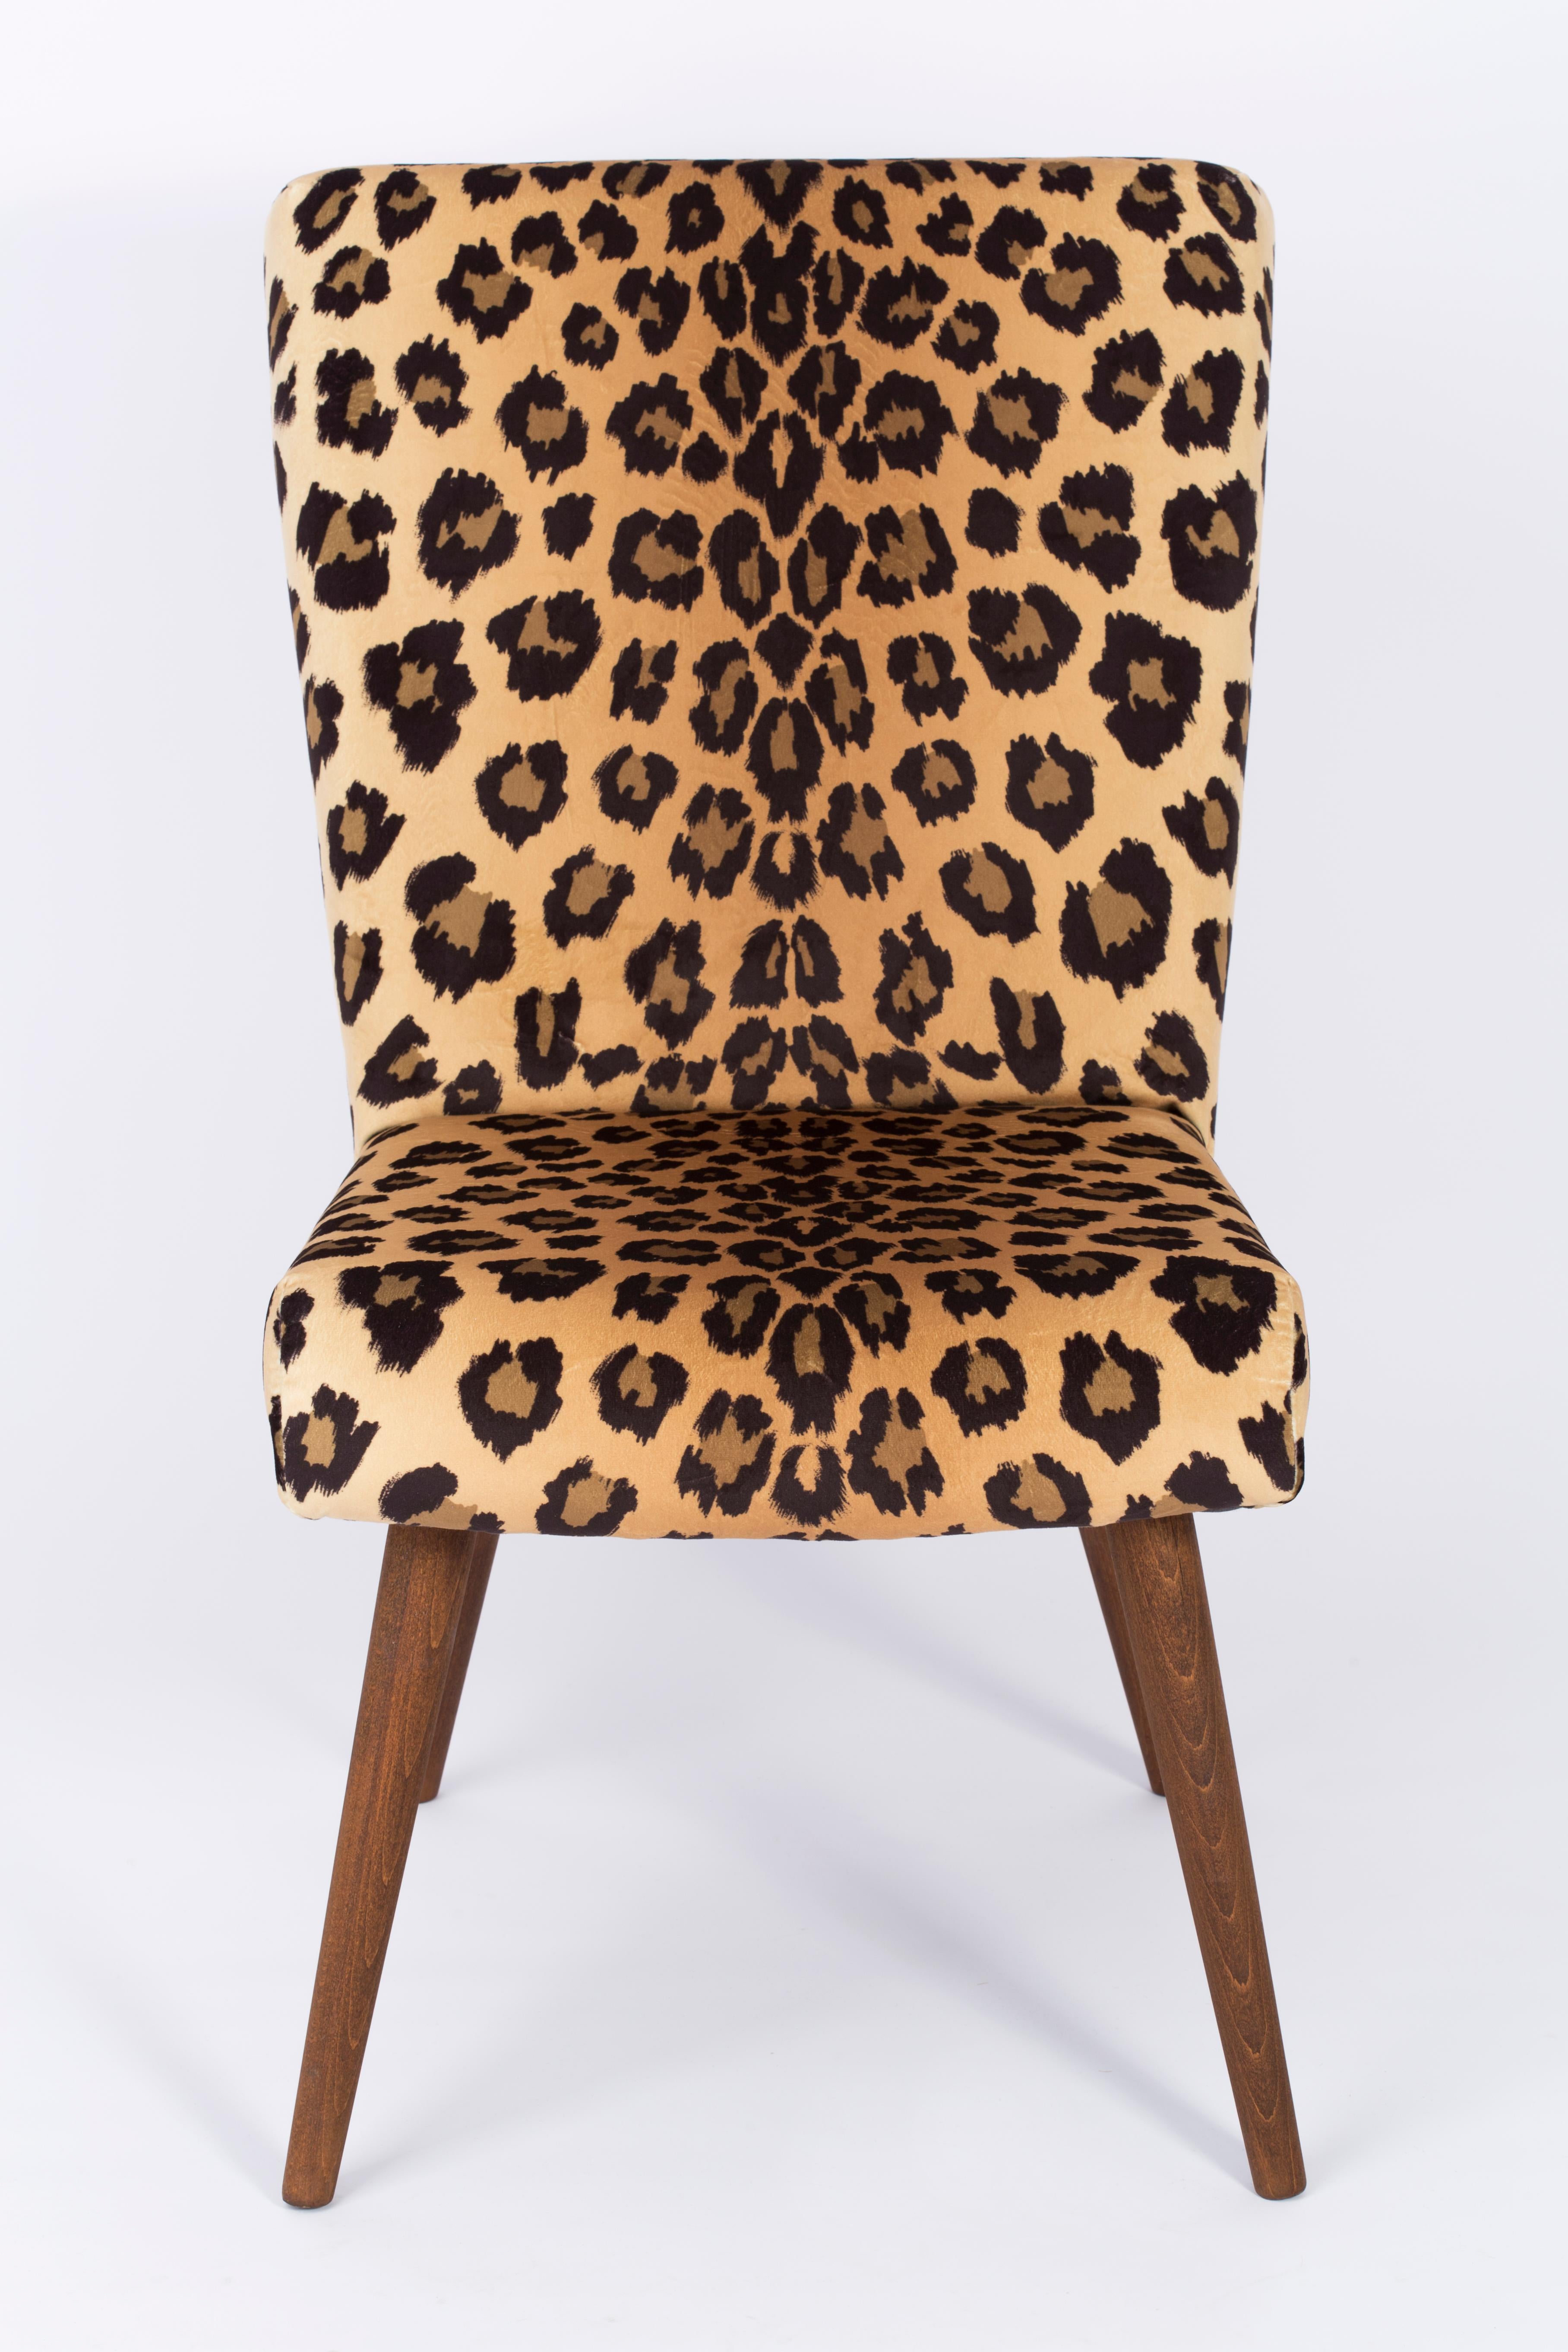 Hand-Crafted Set of Two Mid-Century Modern Leopard Print Chairs, 1960s, Germany For Sale